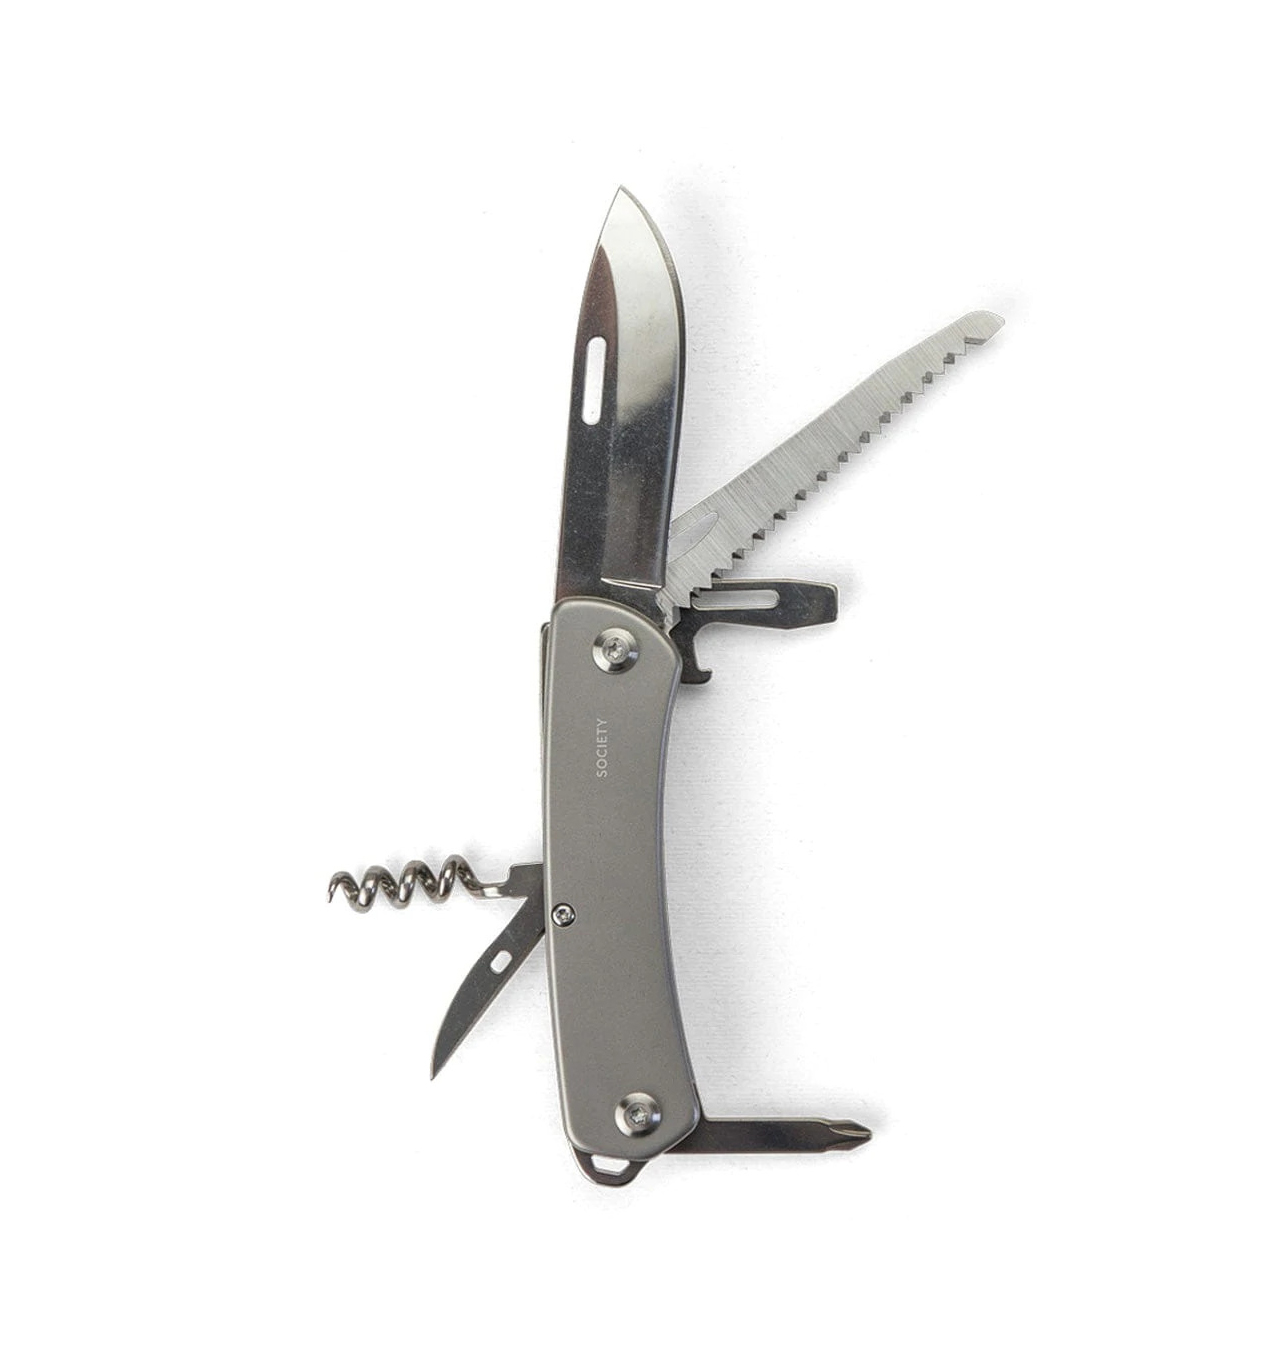 Society---Into-The-Wild-Multi-Tool---Stainless-Steel1